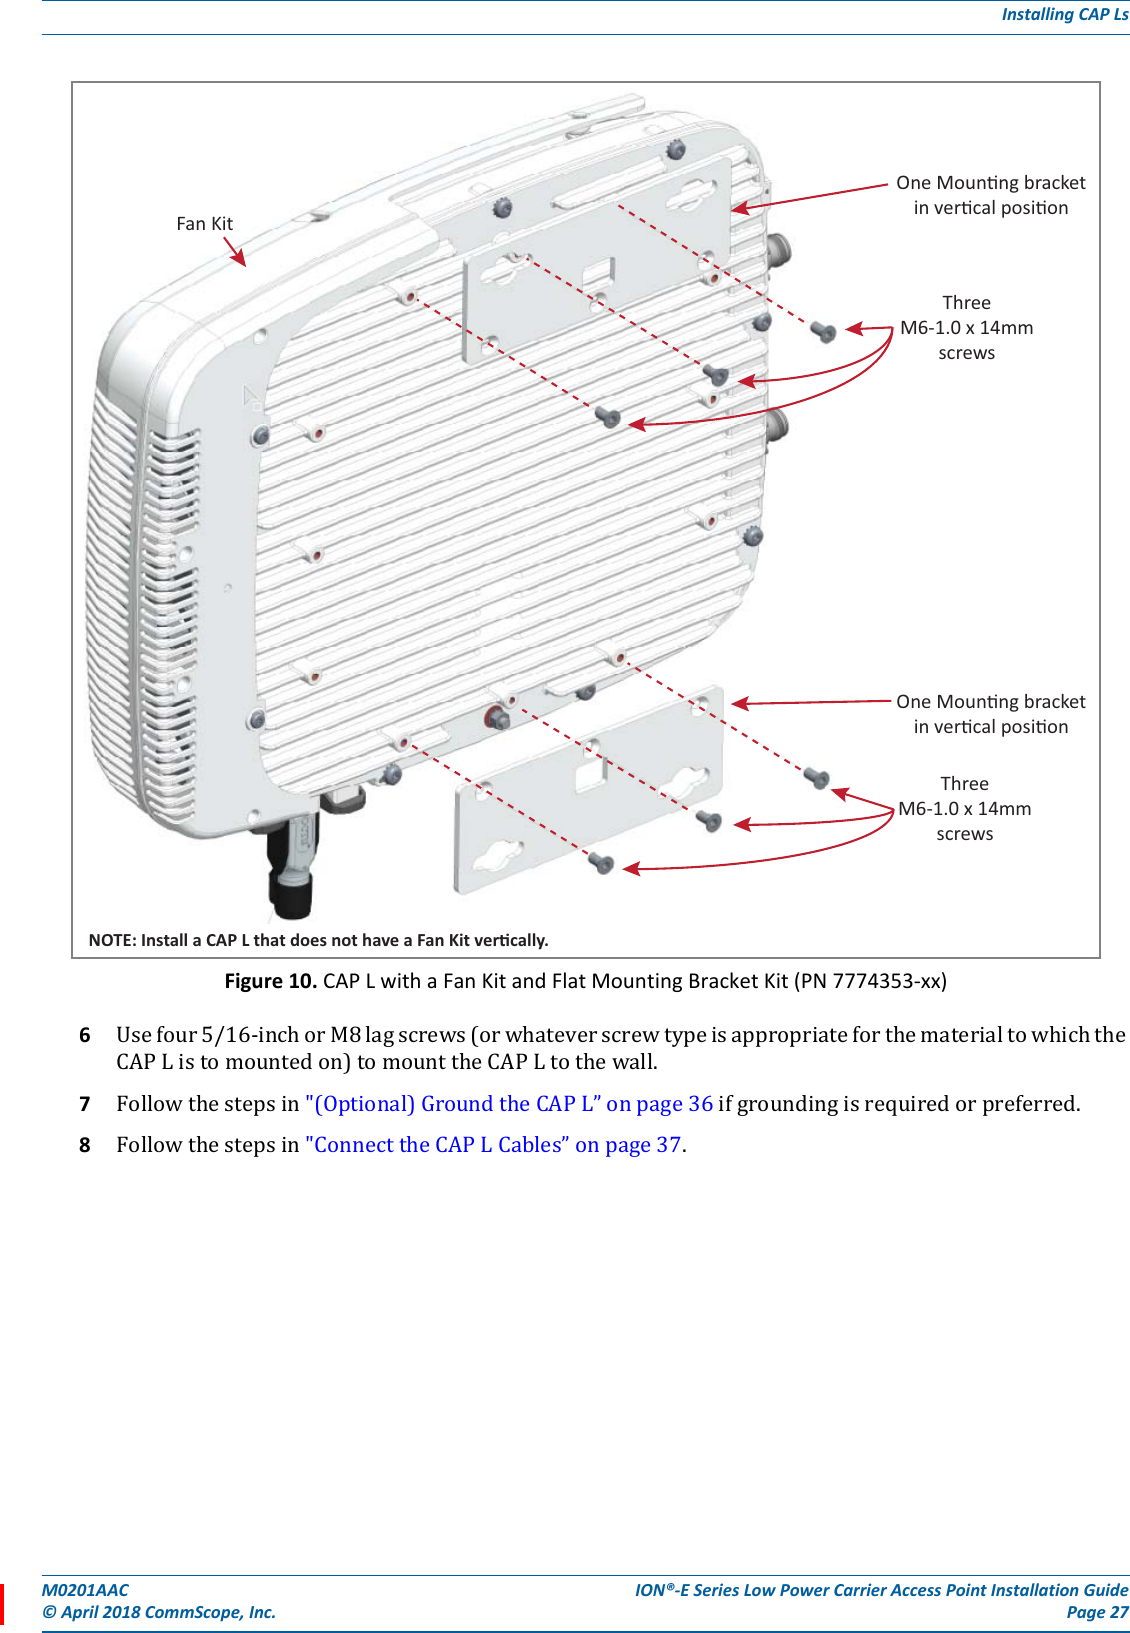 M0201AAC ION®-E Series Low Power Carrier Access Point Installation Guide© April 2018 CommScope, Inc. Page 27Installing CAP LsFigure 10. CAP L with a Fan Kit and Flat Mounting Bracket Kit (PN 7774353-xx)6Usefour5/16-inchorM8lagscrews(orwhateverscrewtypeisappropriateforthematerialtowhichtheCAPListomountedon)tomounttheCAPLtothewall.7Followthestepsin&quot;(Optional)GroundtheCAPL”onpage36ifgroundingisrequiredorpreferred.8Followthestepsin&quot;ConnecttheCAPLCables”onpage37.One Mounng bracketin vercal posionThreeM6-1.0 x 14mmscrewsOne Mounng bracketin vercal posionThreeM6-1.0 x 14mmscrewsNOTE: Install a CAP L that does not have a Fan Kit vercally.Fan Kit